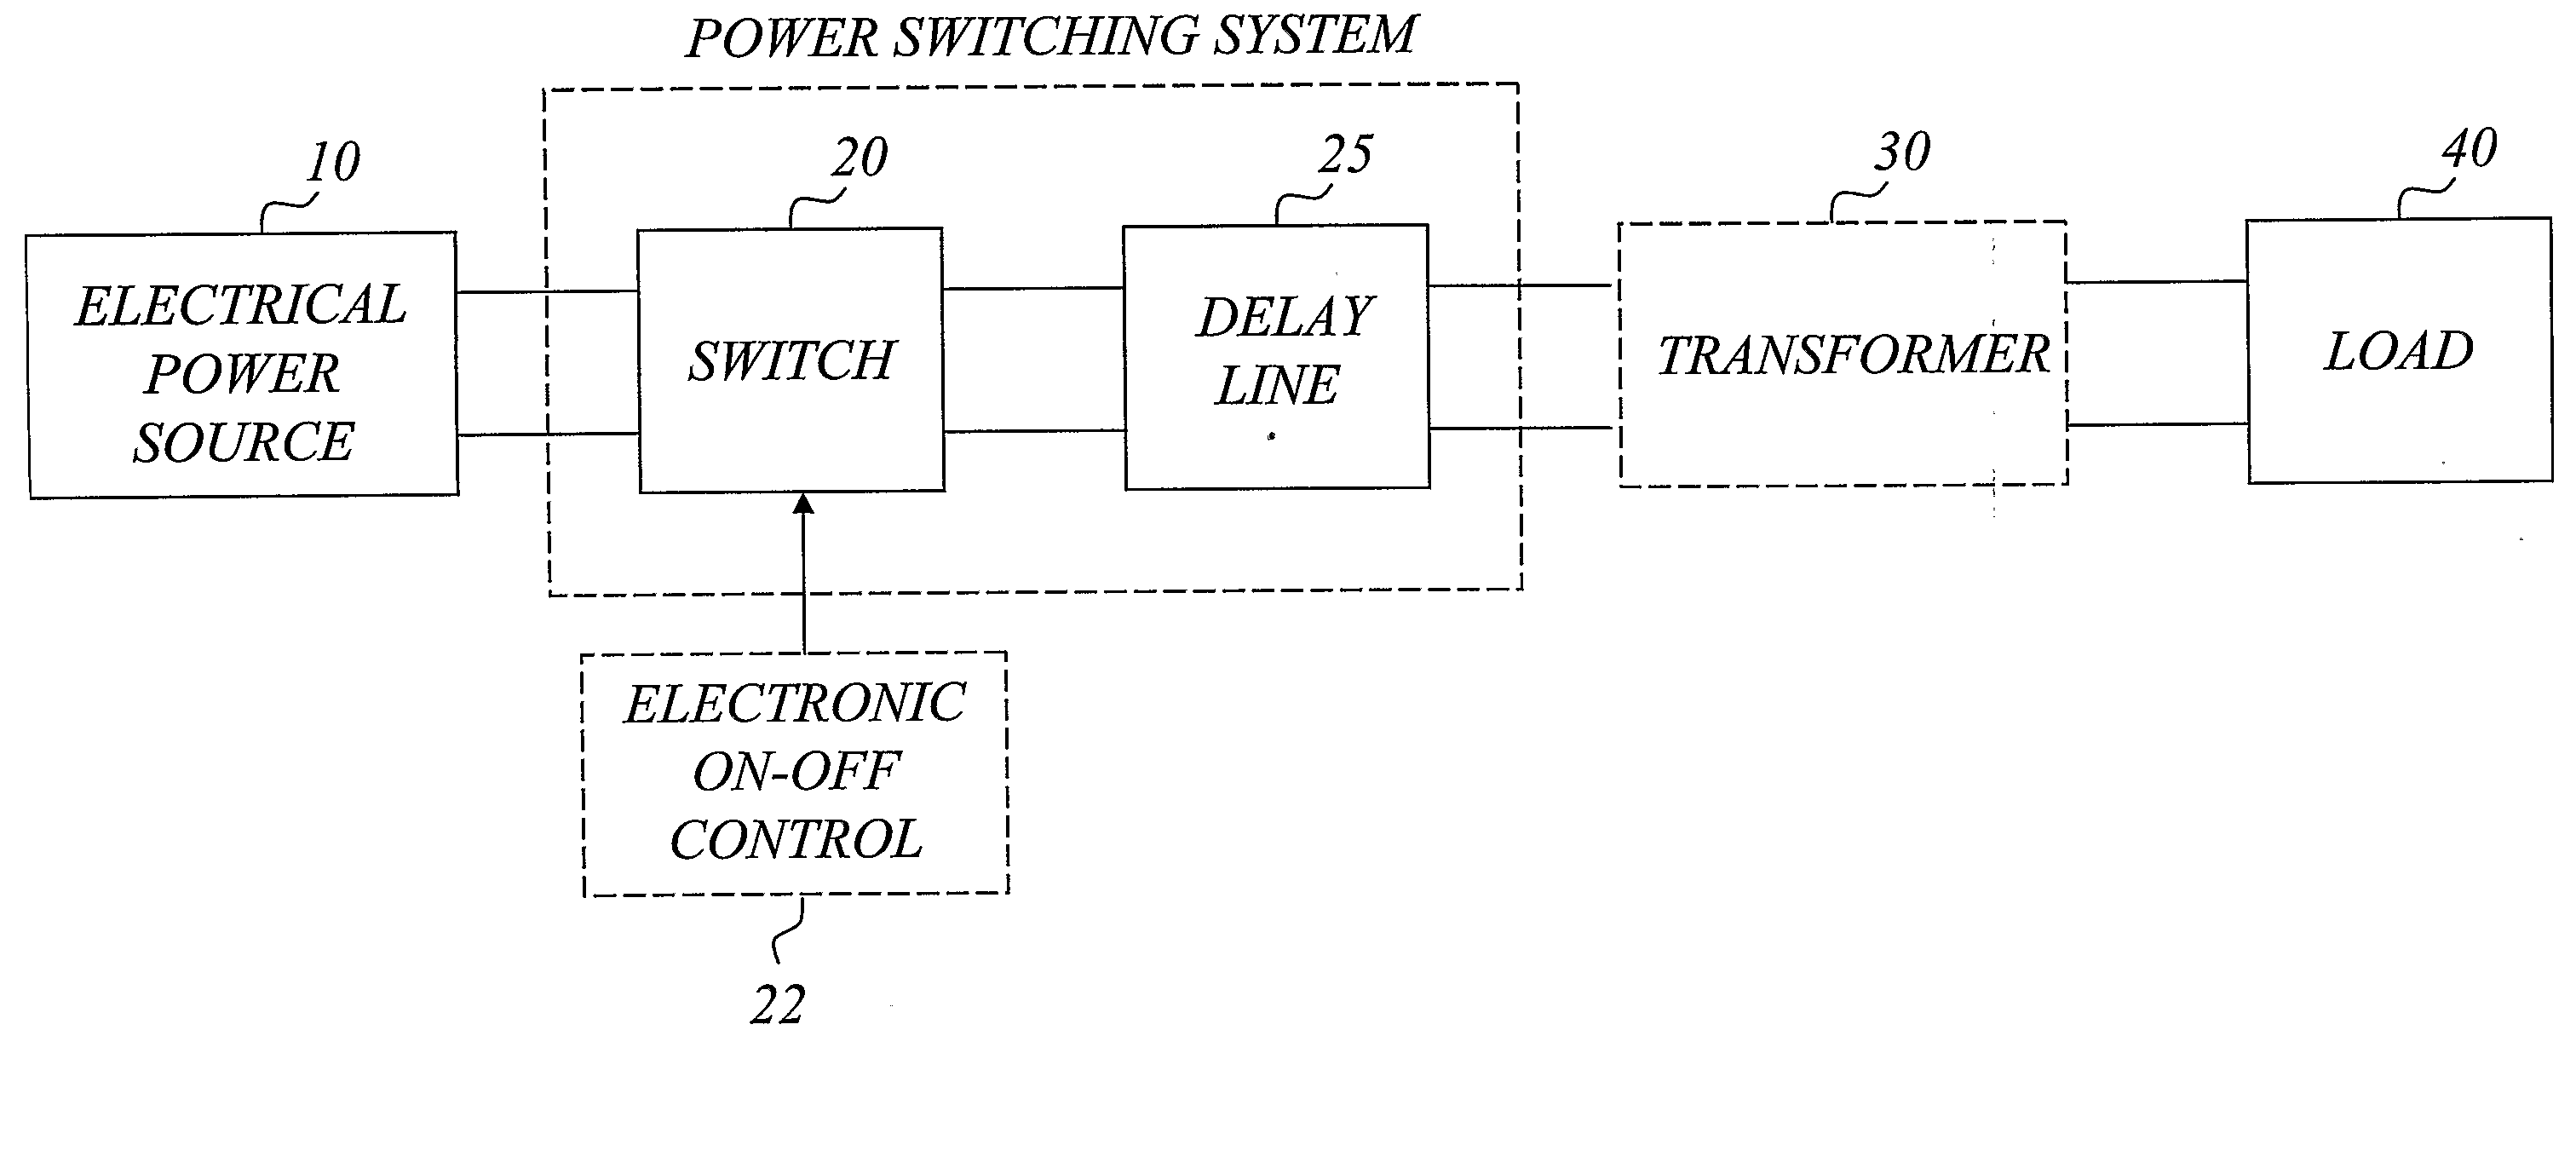 Electrical Power Switching With Efficient Switch Protection